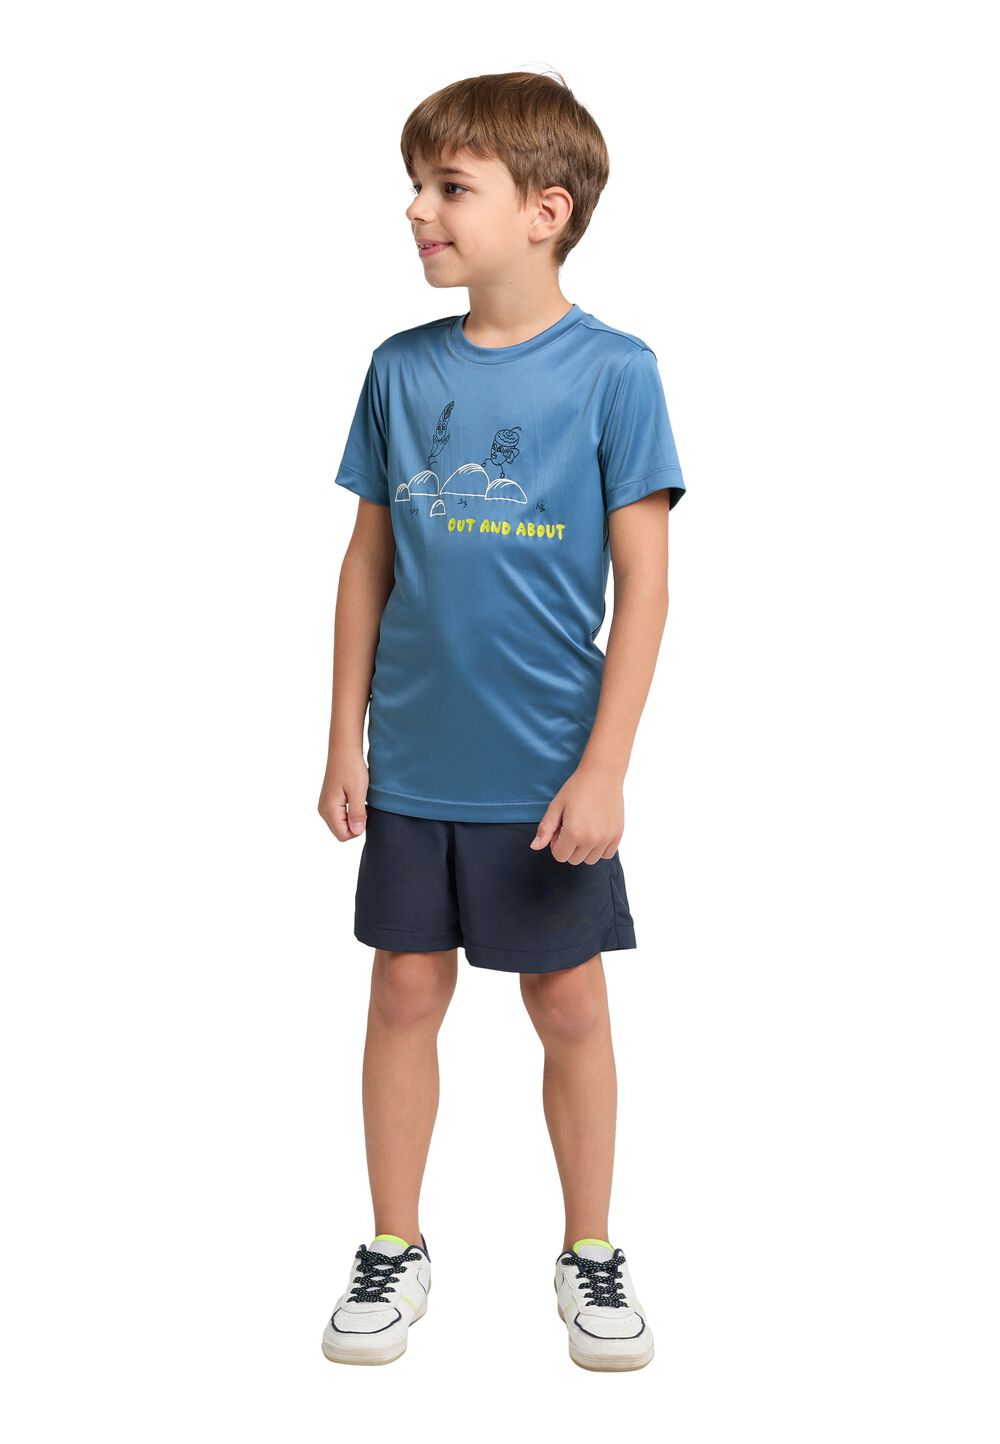 Jack Wolfskin OUT AND About T-Shirt Kids Functioneel shirt Kinderen 164 ele tal blue ele tal blue